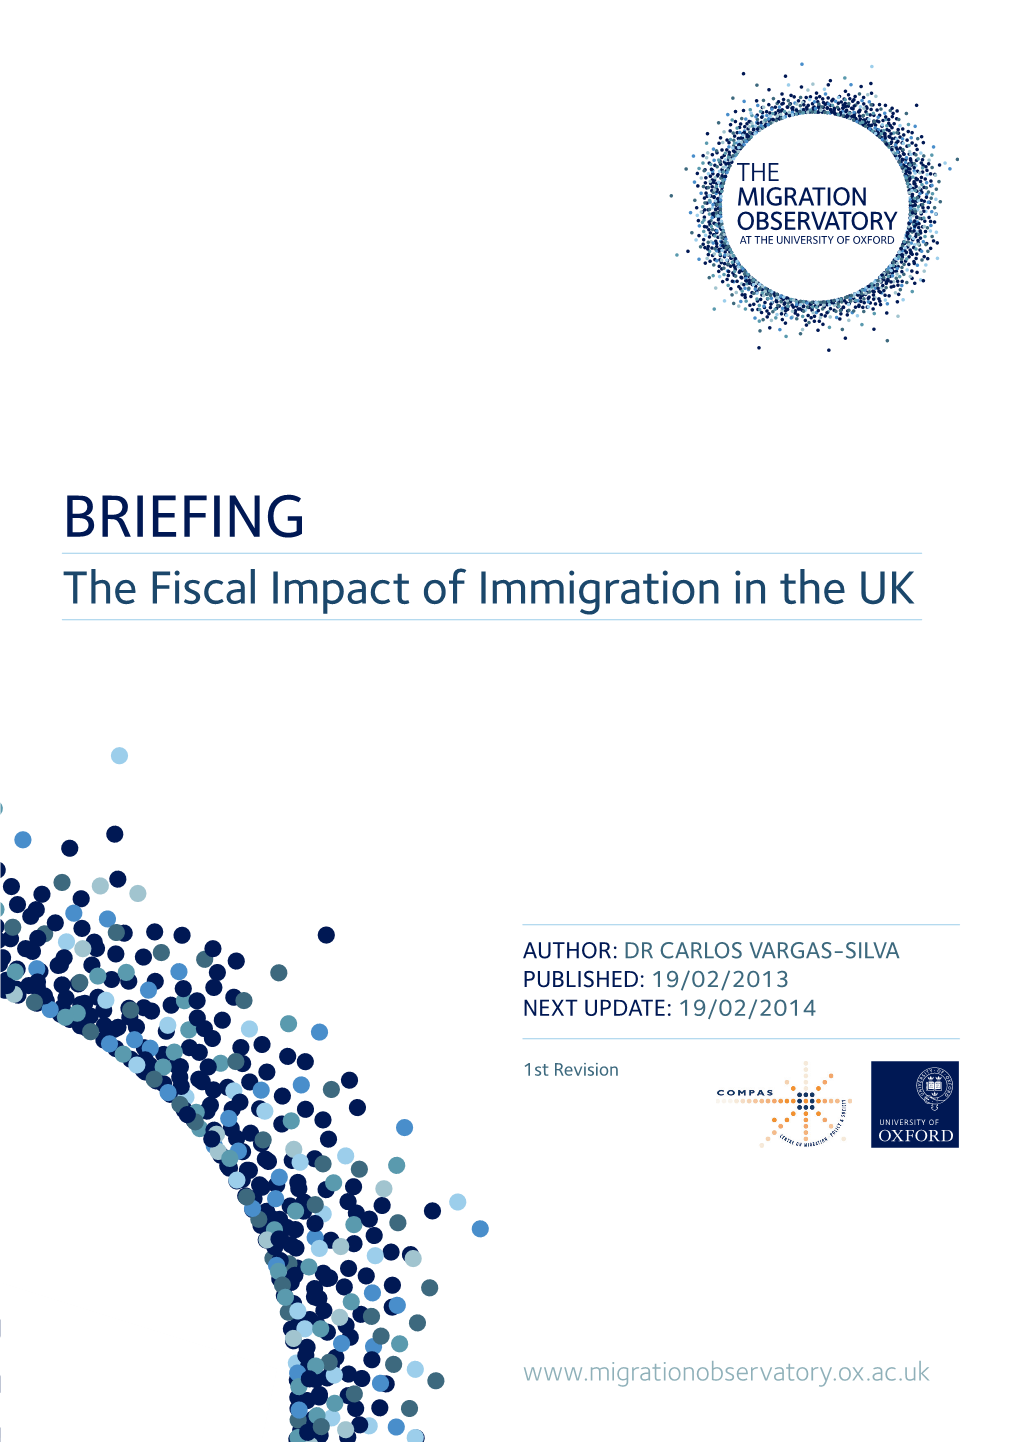 BRIEFING the Fiscal Impact of Immigration in the UK